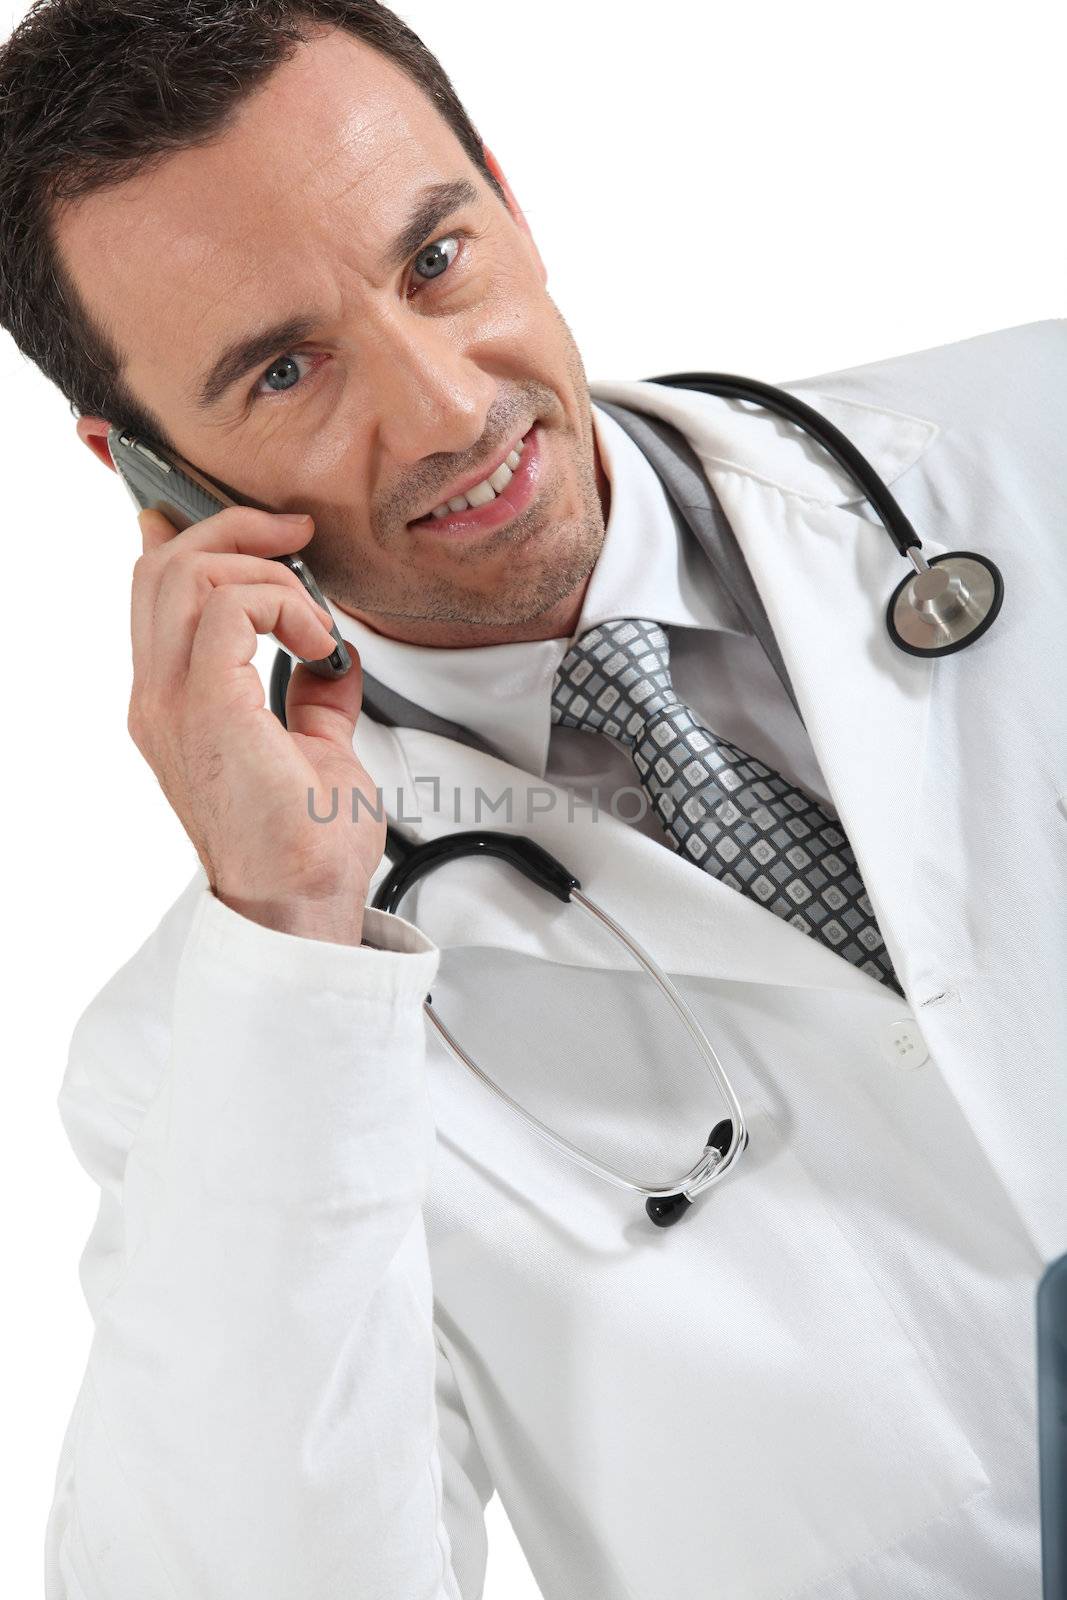 Male doctor with mobile telephone